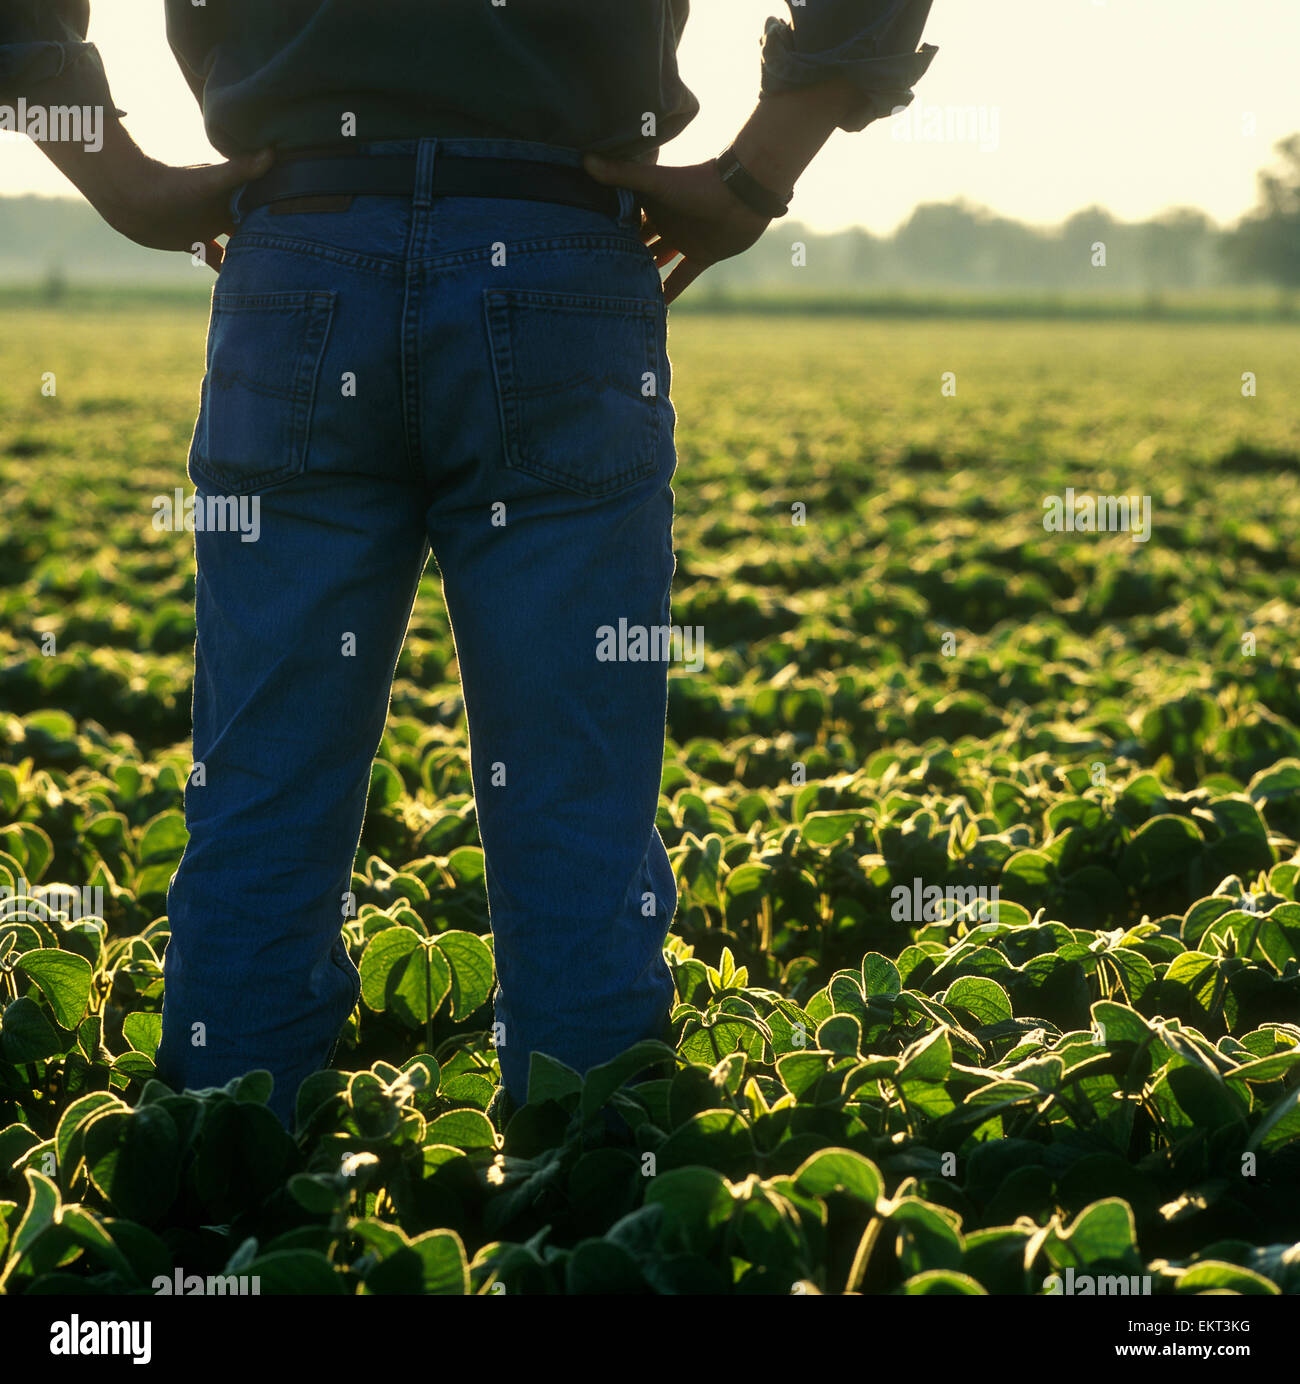 Agriculture - A farmer looks out across his early growth soybean crop at sunrise, inspecting it Stock Photo